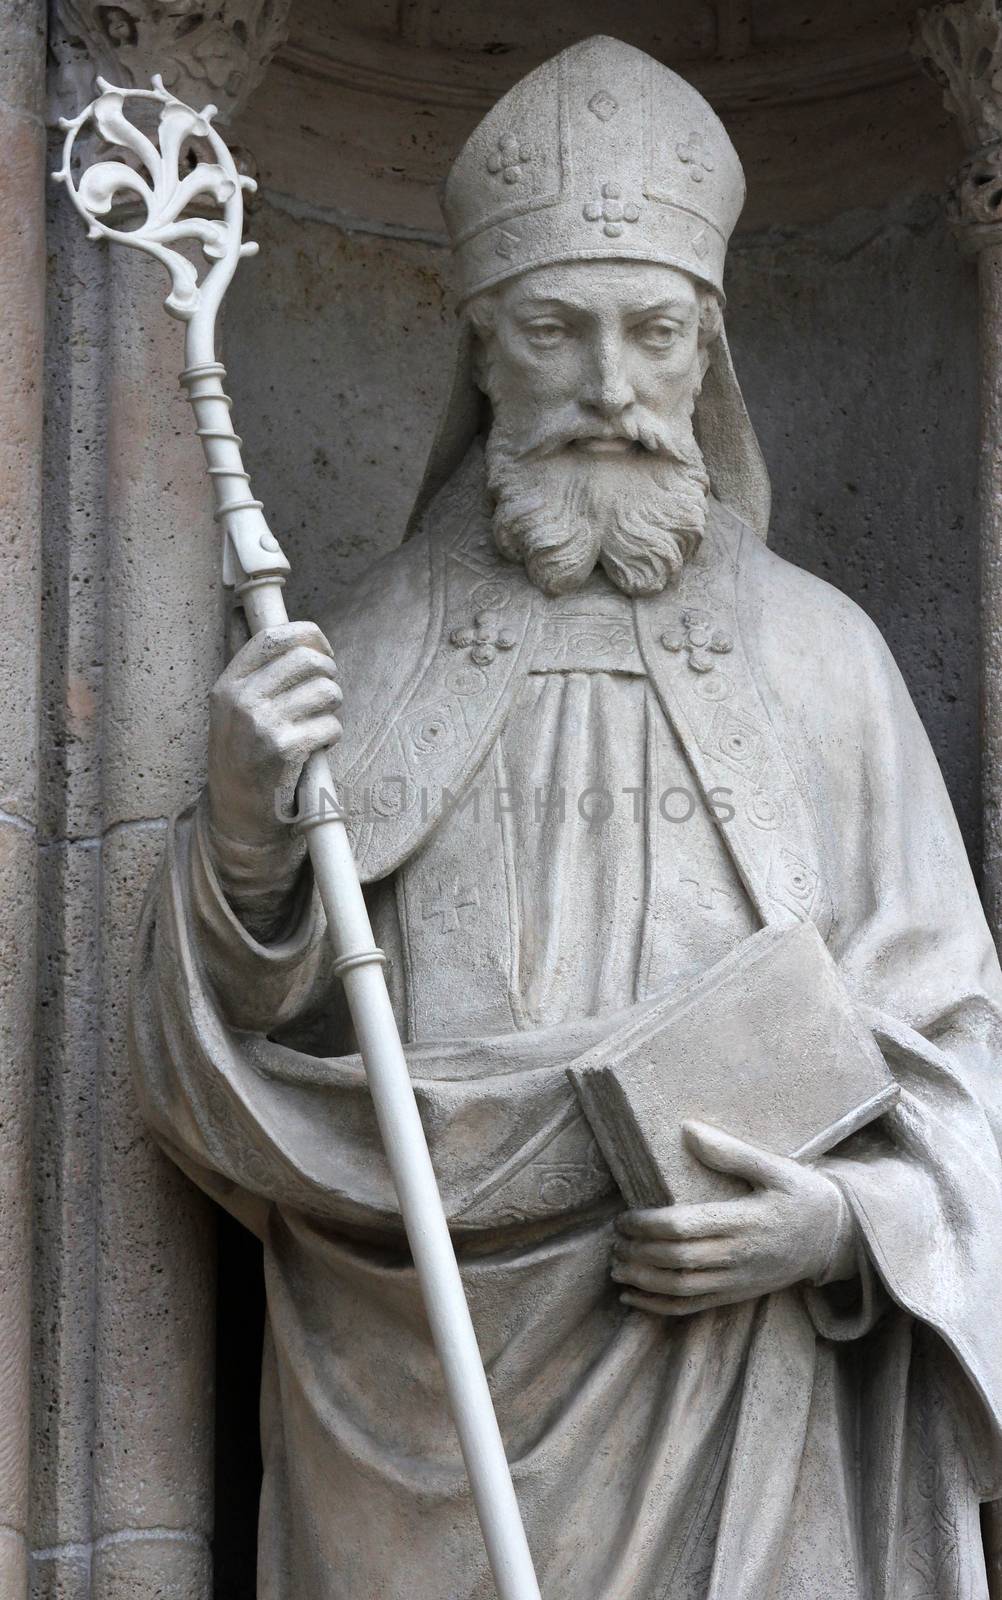 Statue of Saint Cyril on the portal of the cathedral dedicated to the Assumption of Mary in Zagreb